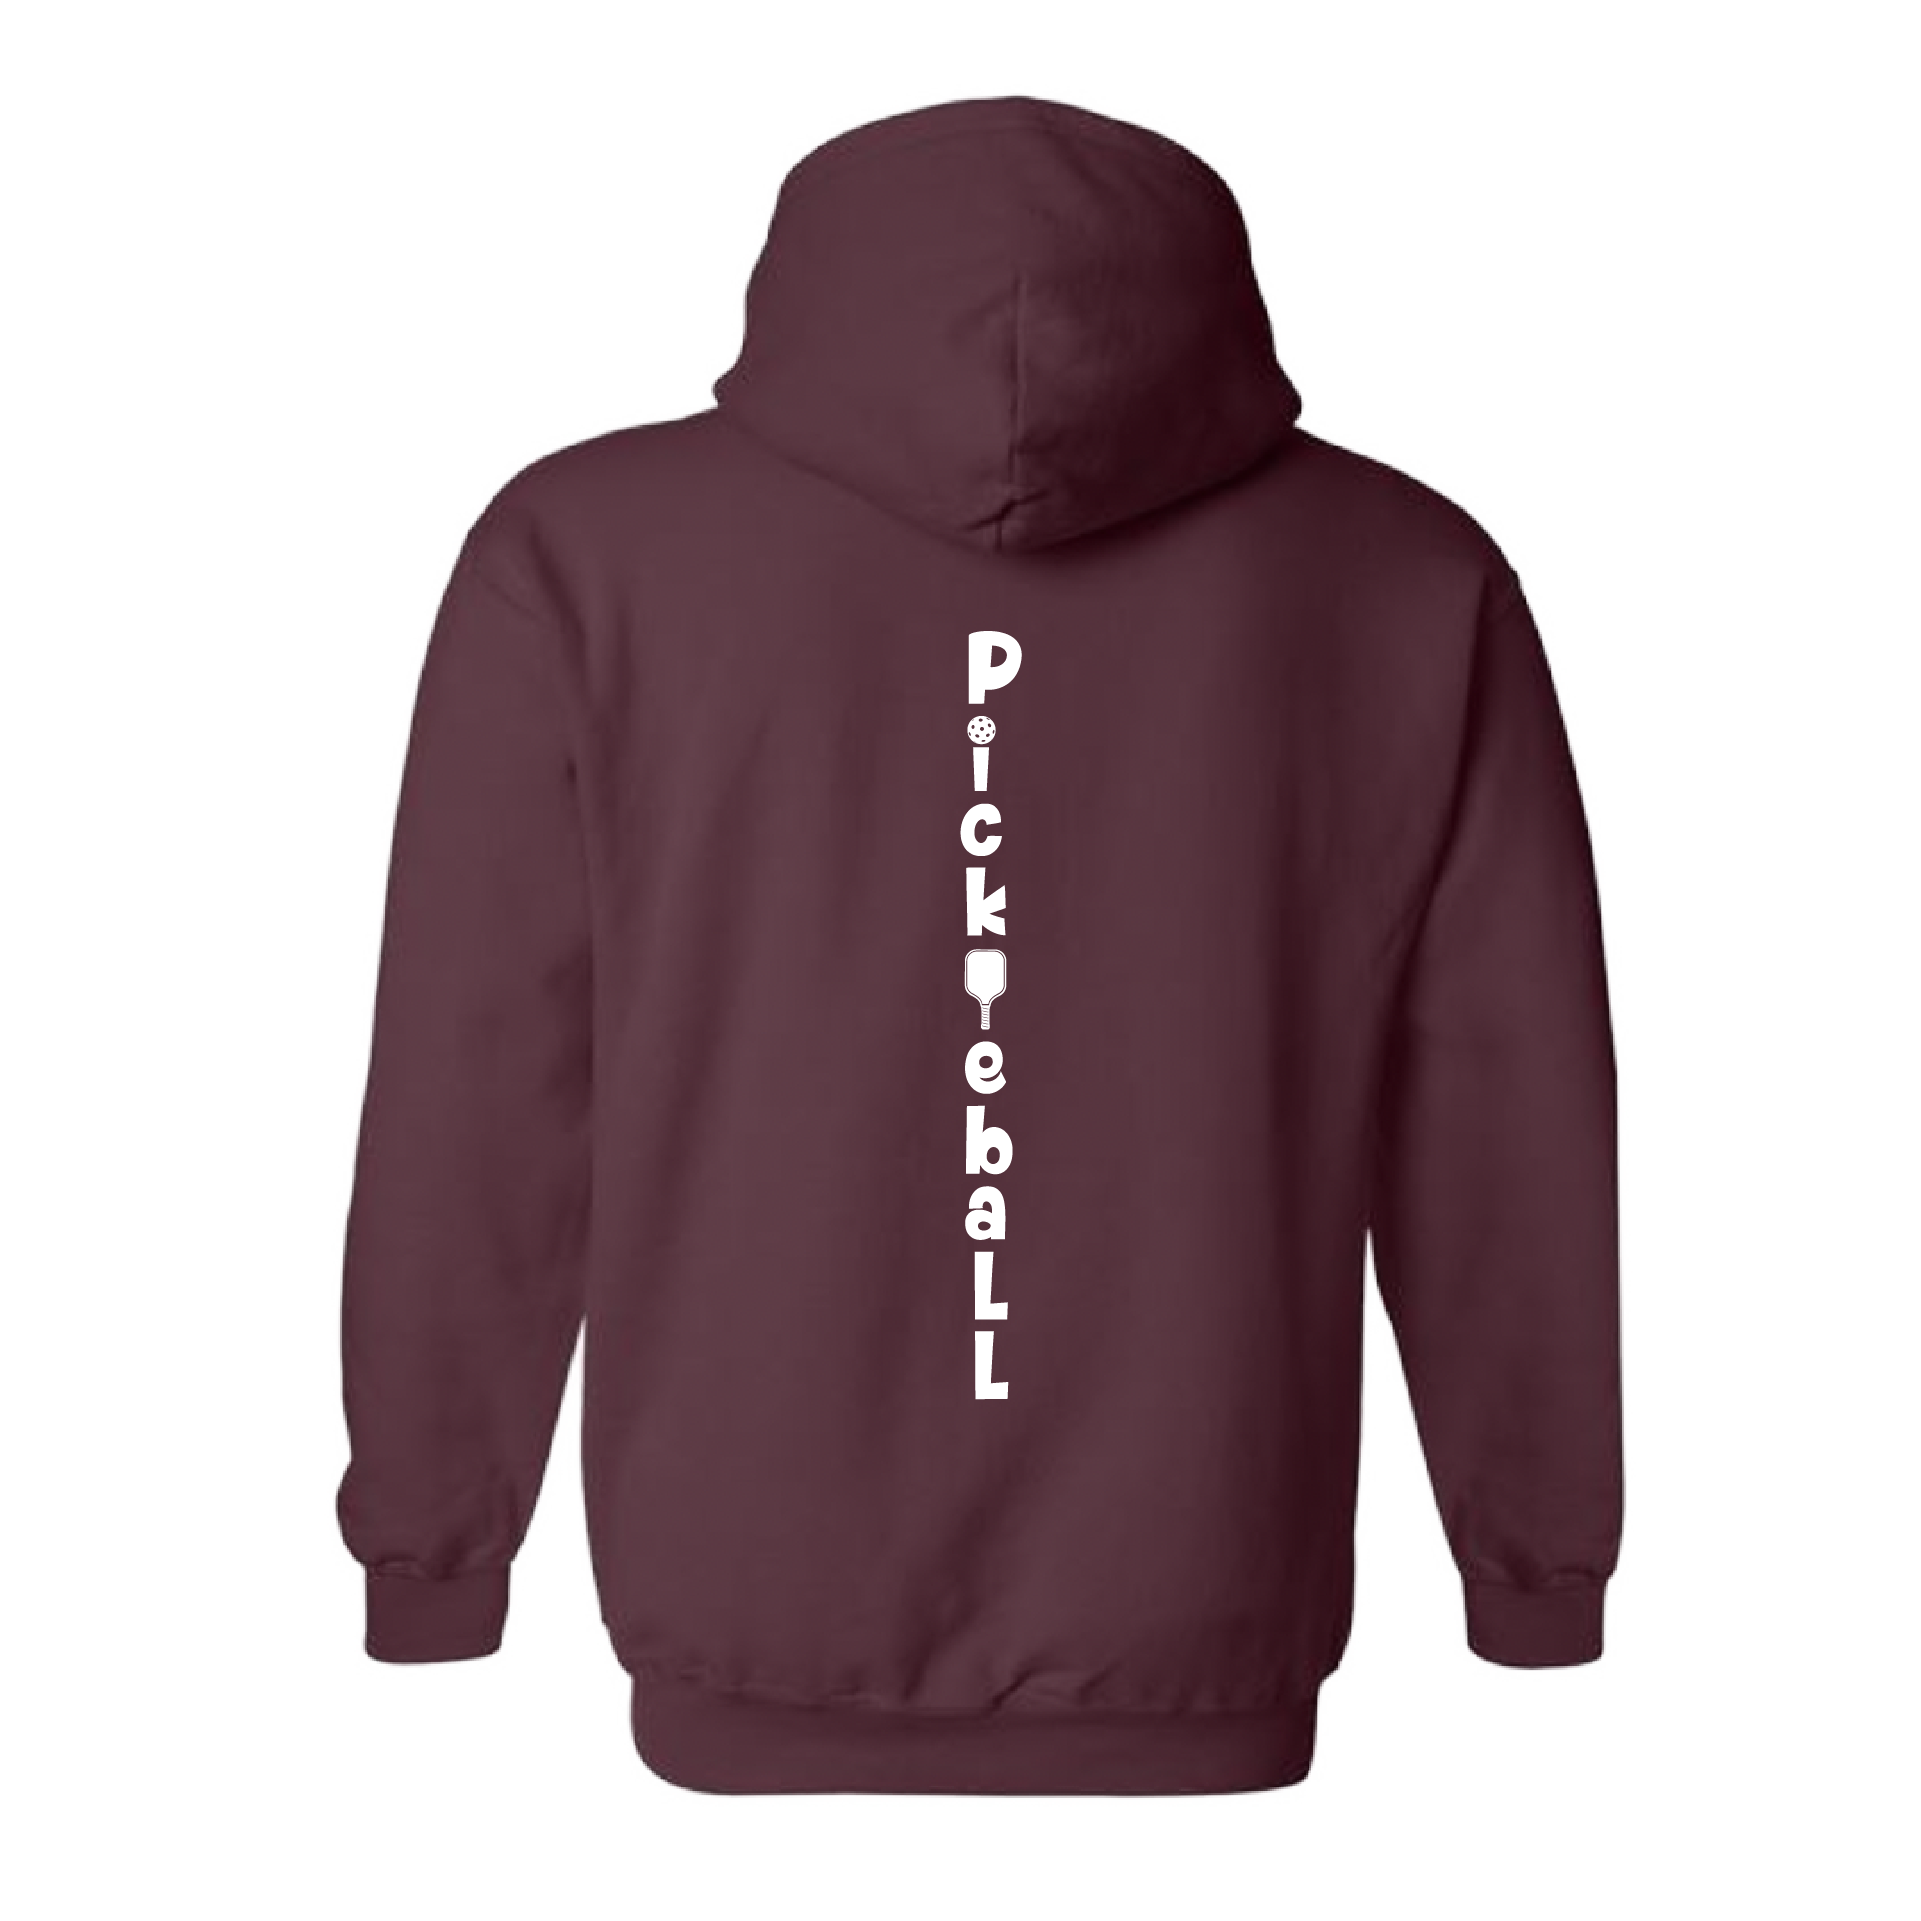 Pickleball Design: Pickleball Vertical (Customizable Location)  Unisex Hooded Sweatshirt: Moisture-wicking, double-lined hood, front pouch pocket.  This unisex hooded sweatshirt is ultra comfortable and soft. Stay warm on the Pickleball courts while being that hit with this one of kind design.